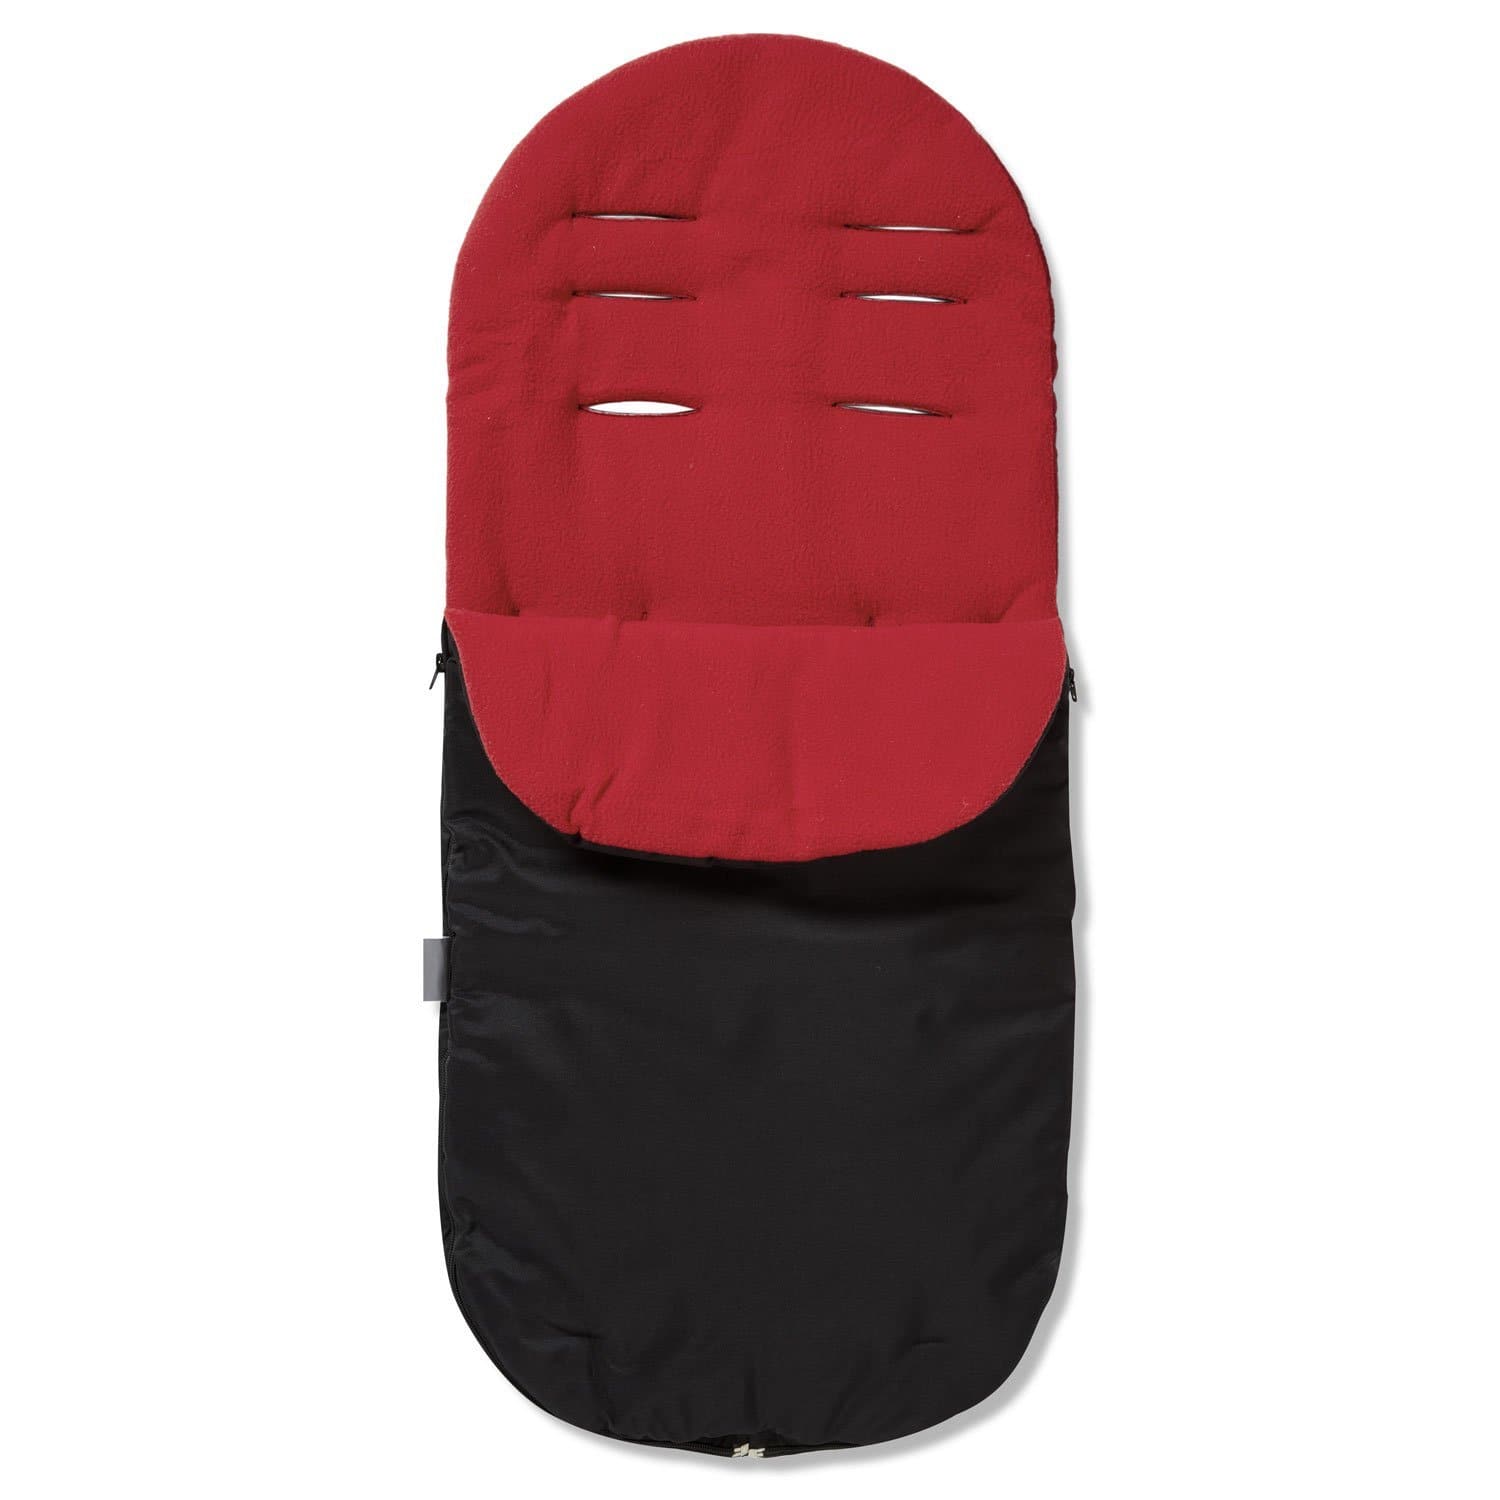 Footmuff / Cosy Toes Compatible with Hesba - Red / Fits All Models | For Your Little One